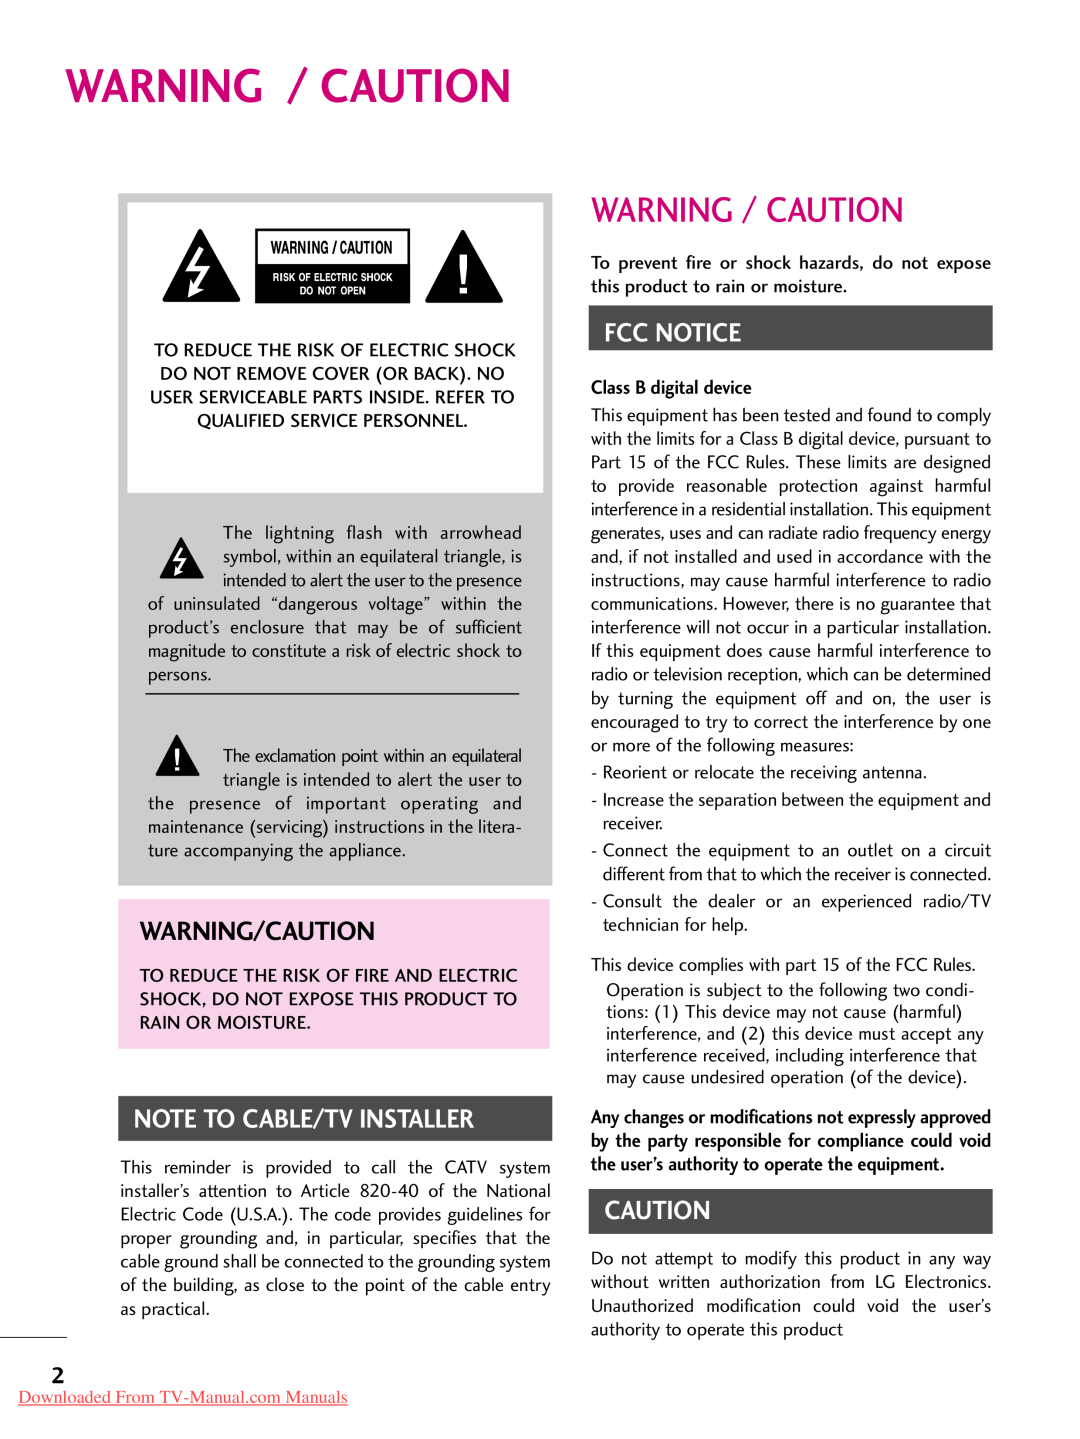 LG Electronics 42PJ350 Warning / Caution, Warning/Caution, Class B digital device, Note To Cable/Tv Installer, Fcc Notice 